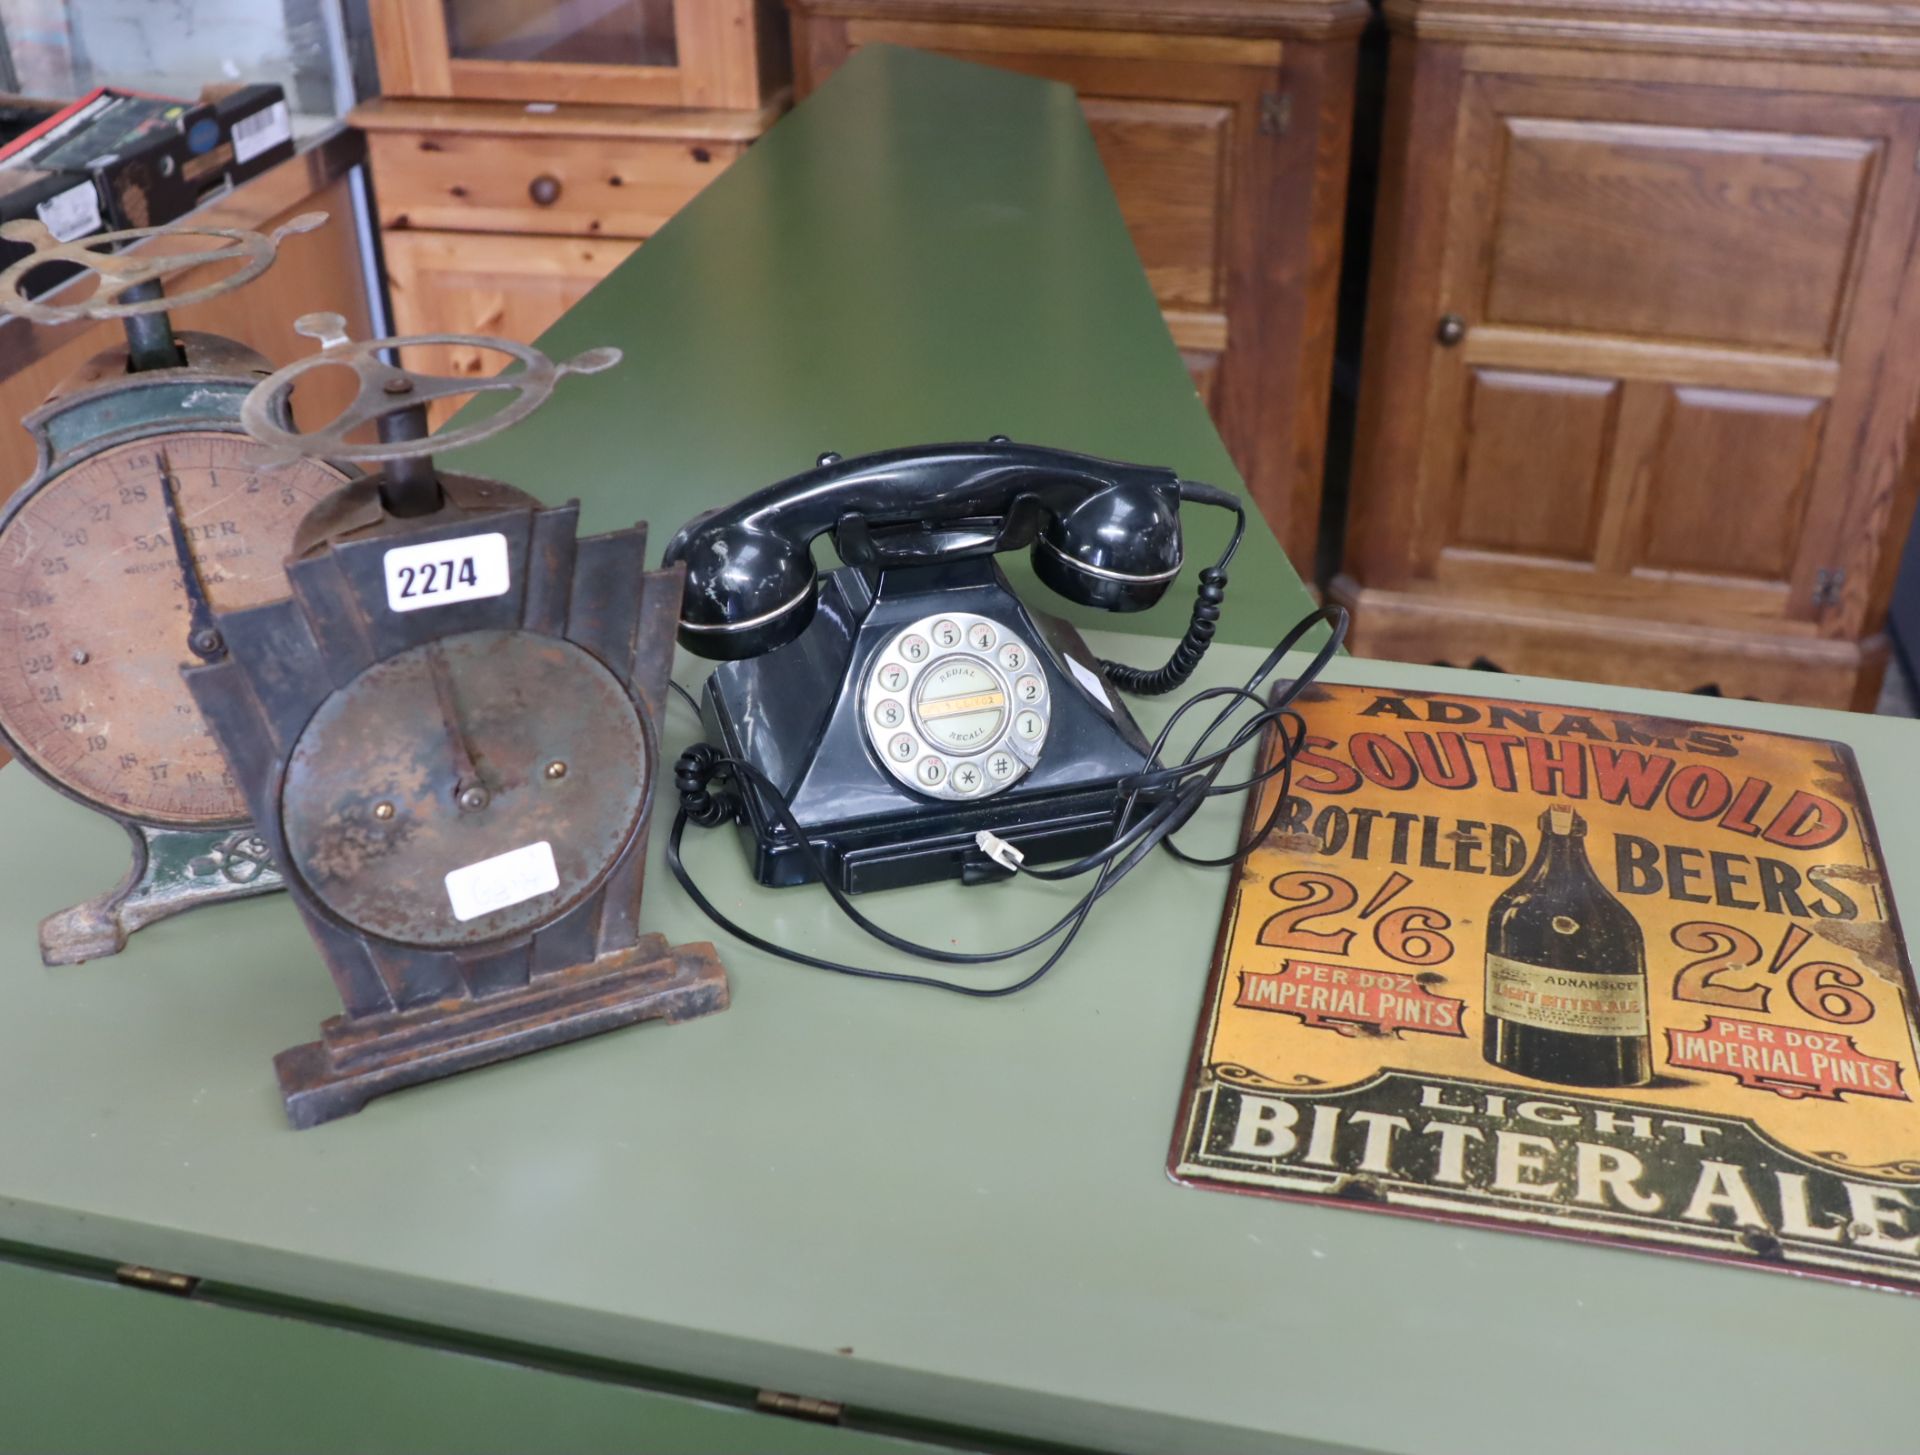 2x sets weighing scales, vintage style telephone and a repro Adnams Southwold bottled beers sign